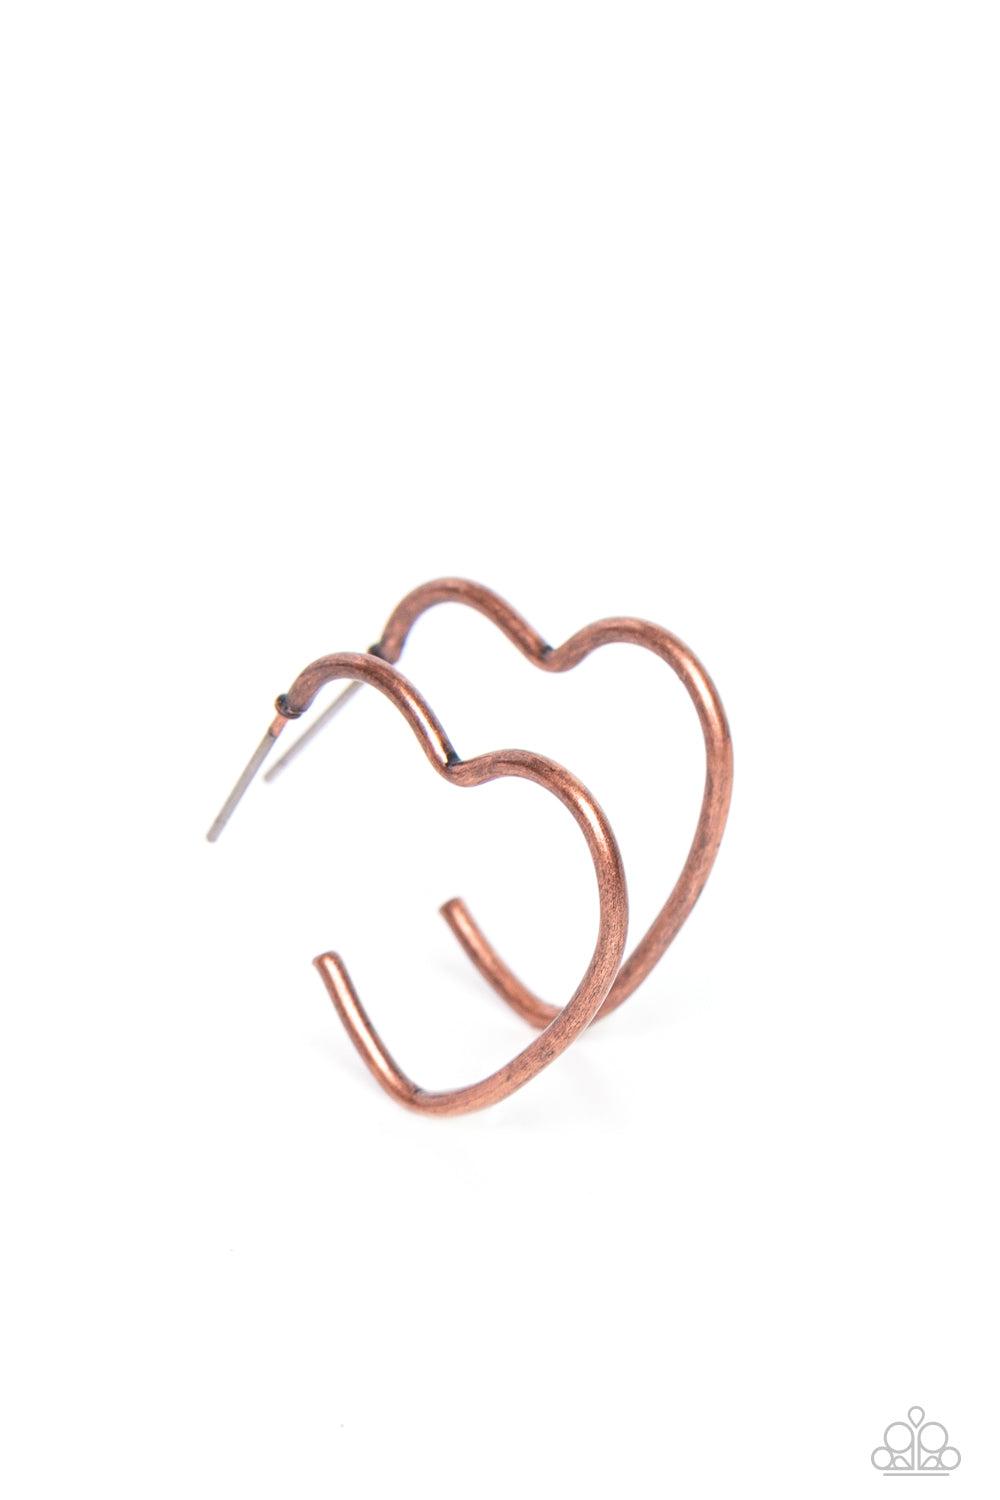 Burnished Beau Copper Heart Hoop Earrings - Paparazzi Accessories- lightbox - CarasShop.com - $5 Jewelry by Cara Jewels